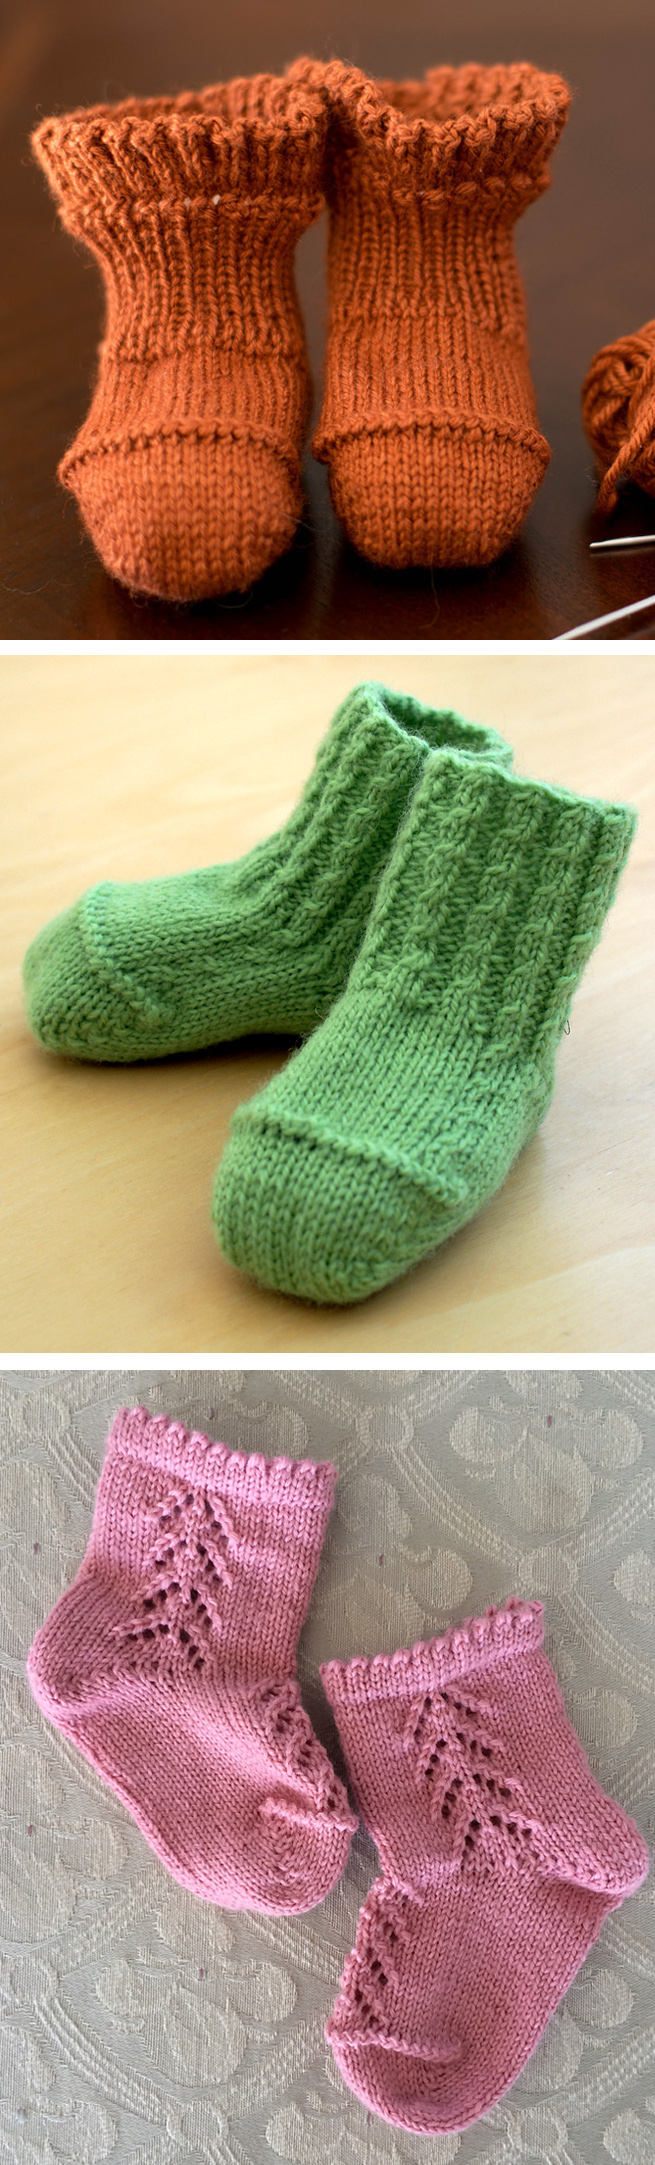 Free Knitting Patterns For Socks On Four Needles Ba Booties Knitting Patterns In The Loop Knitting